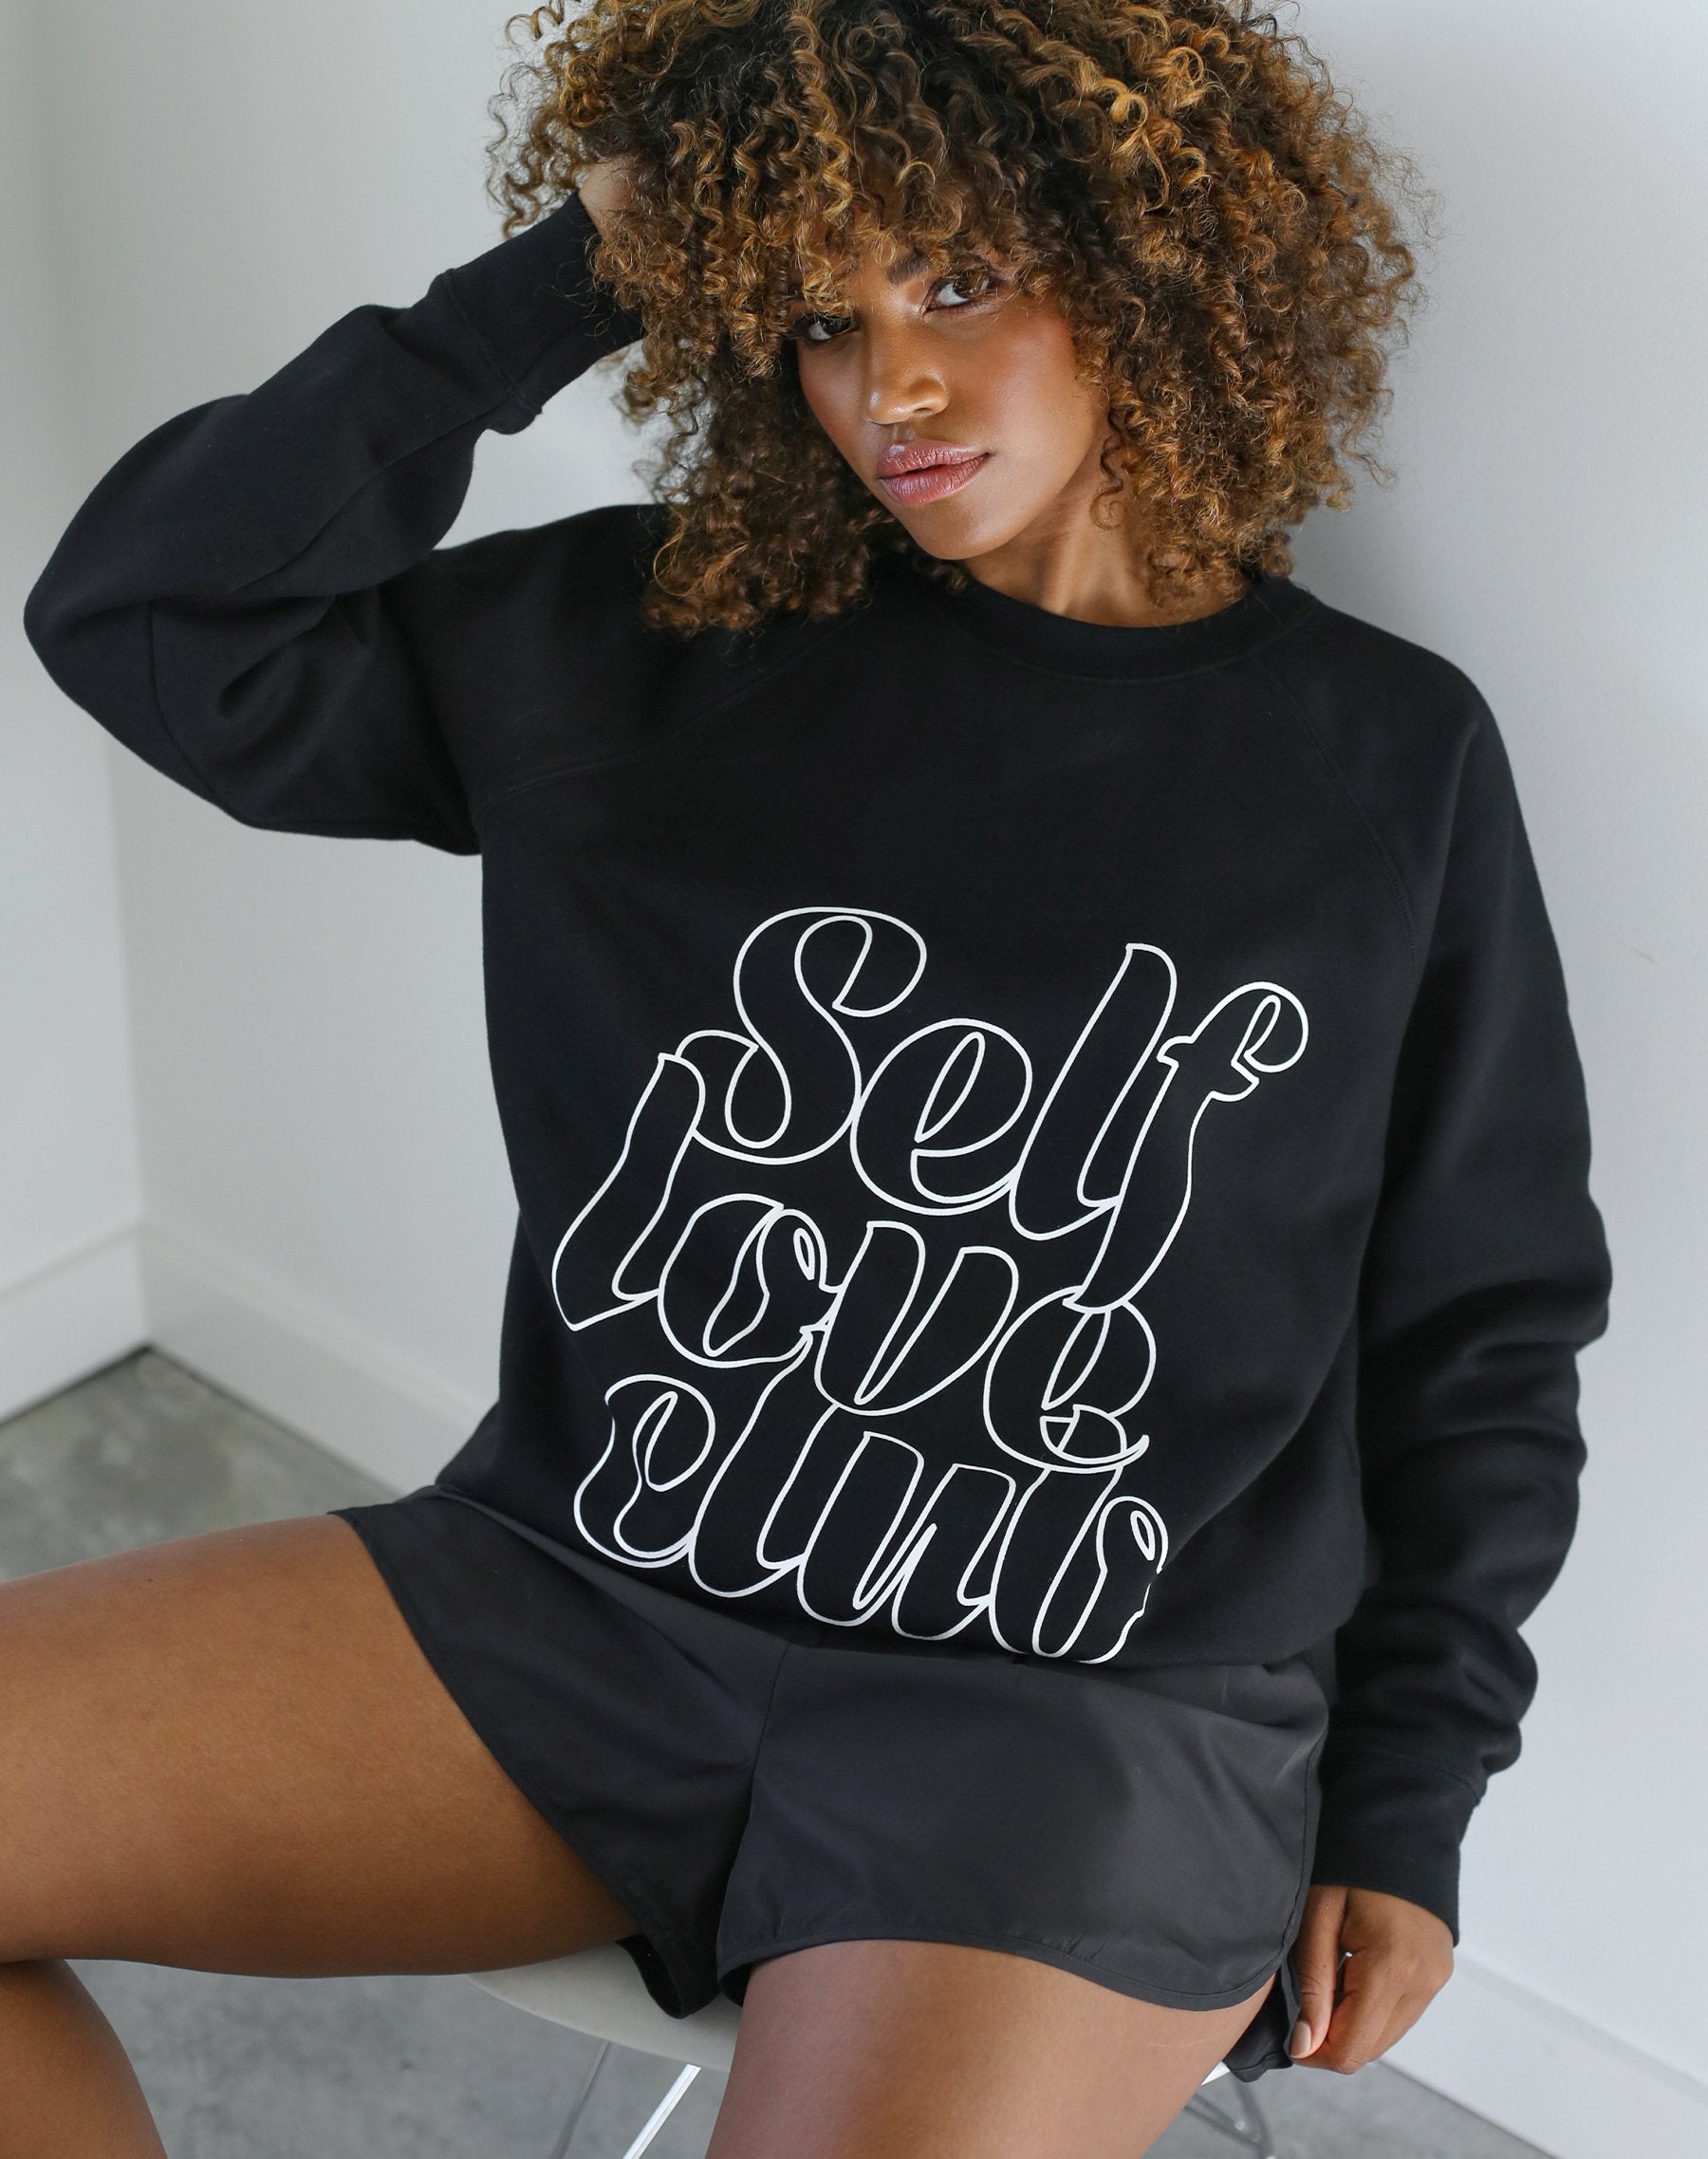 Brunette the Label - Crew - All You Need Is Self Love